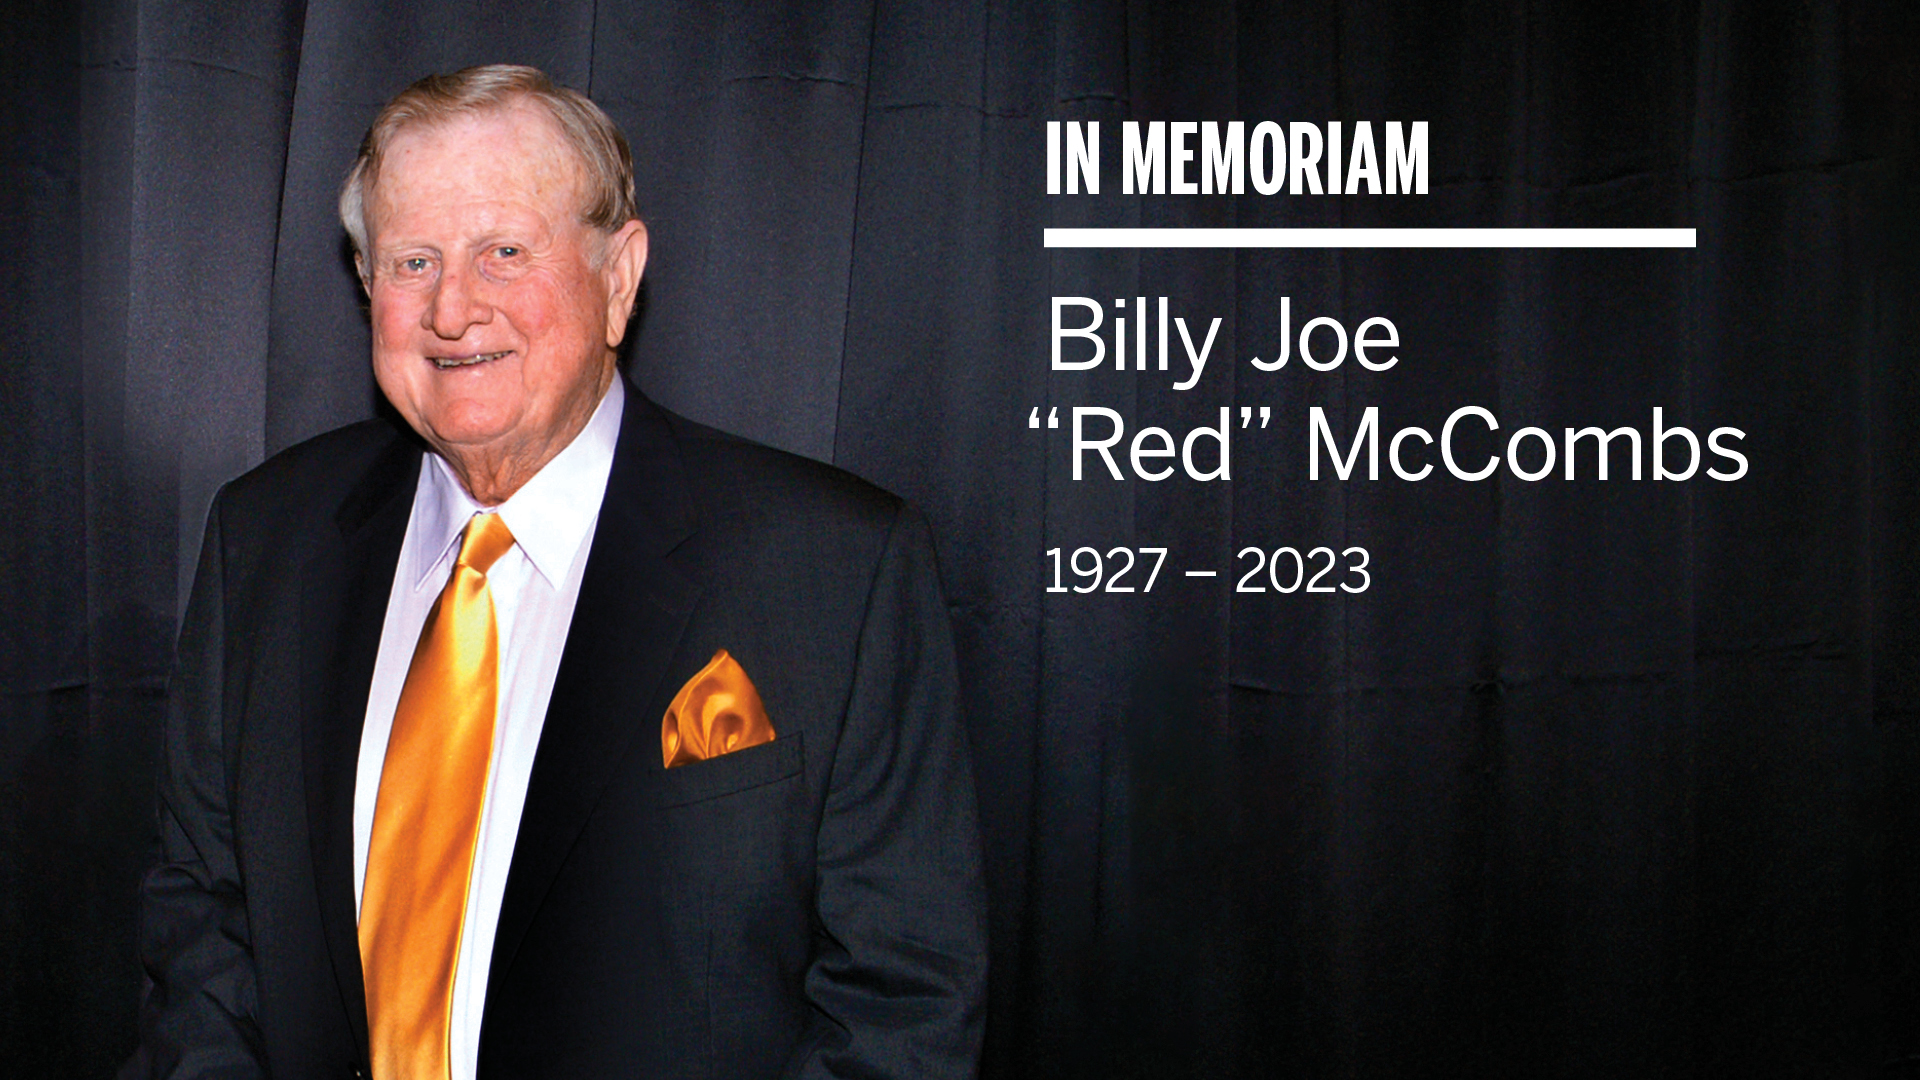 civile hjemmehørende tapet Texas McCombs on Twitter: "We mourn the passing of Billy Joe "Red" McCombs  and are thinking of his family and friends at this time. Red was widely  known for his philanthropy. In